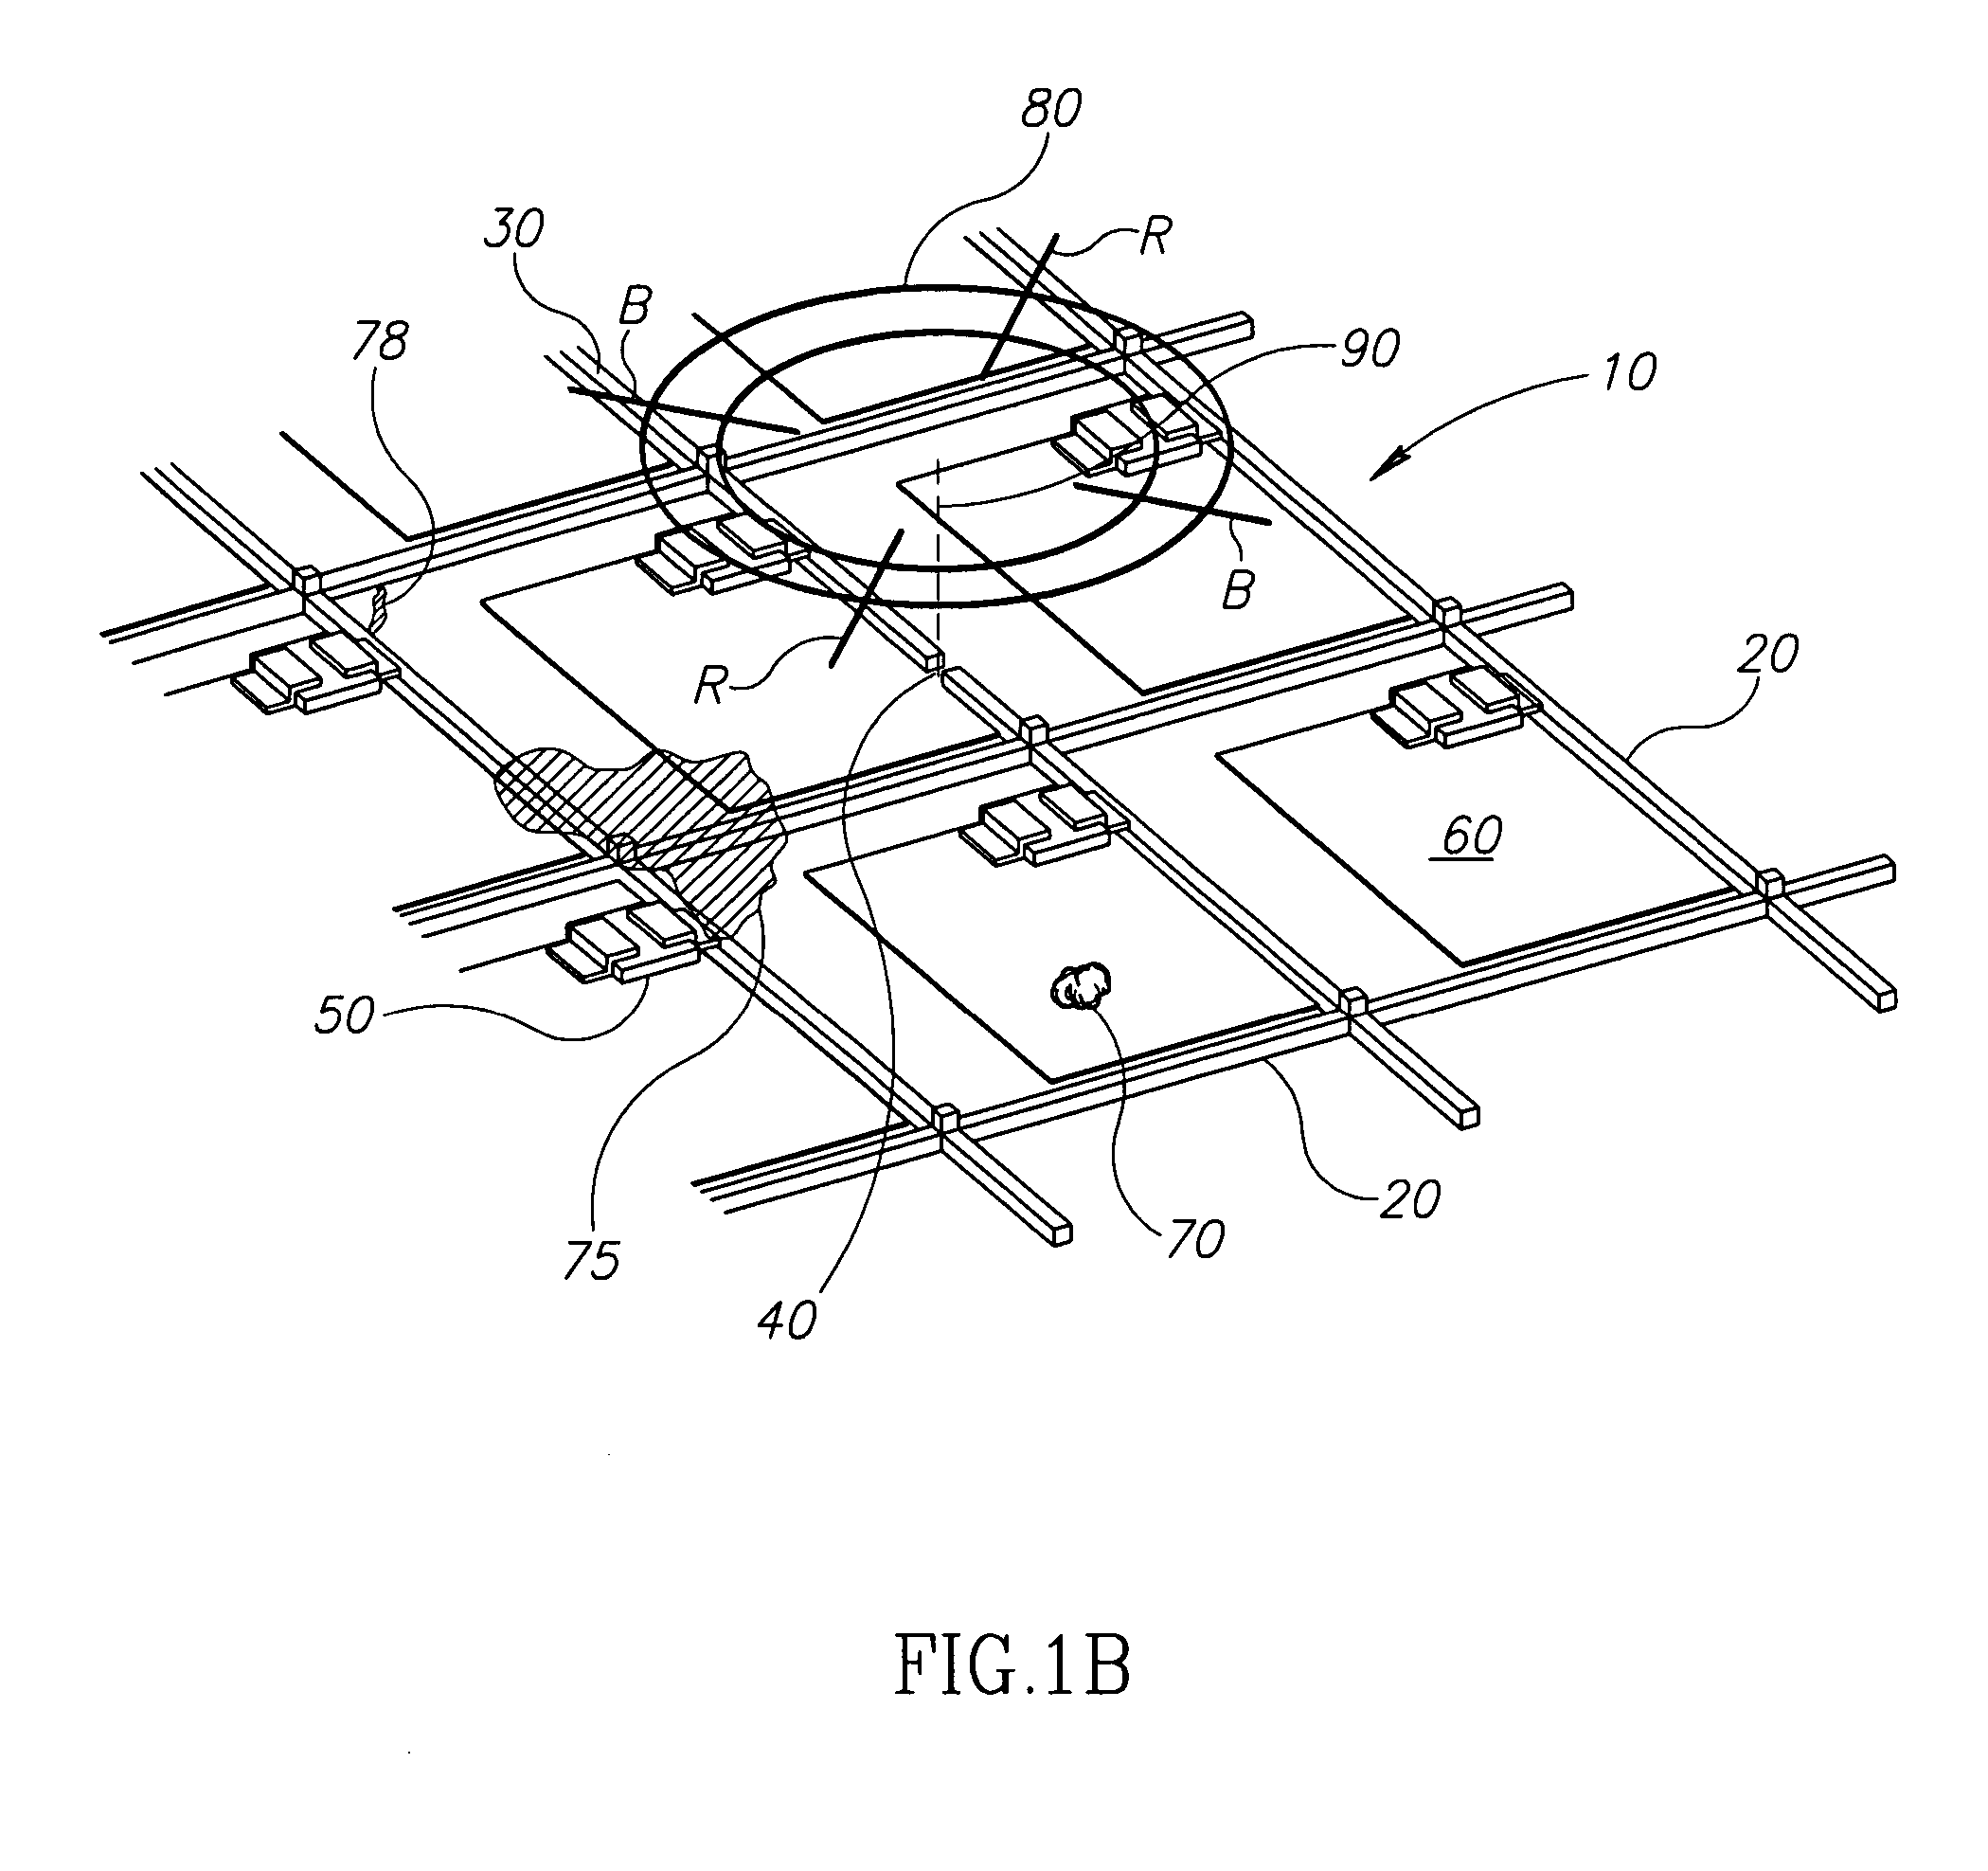 System and method for inspecting patterned devices having microscopic conductors